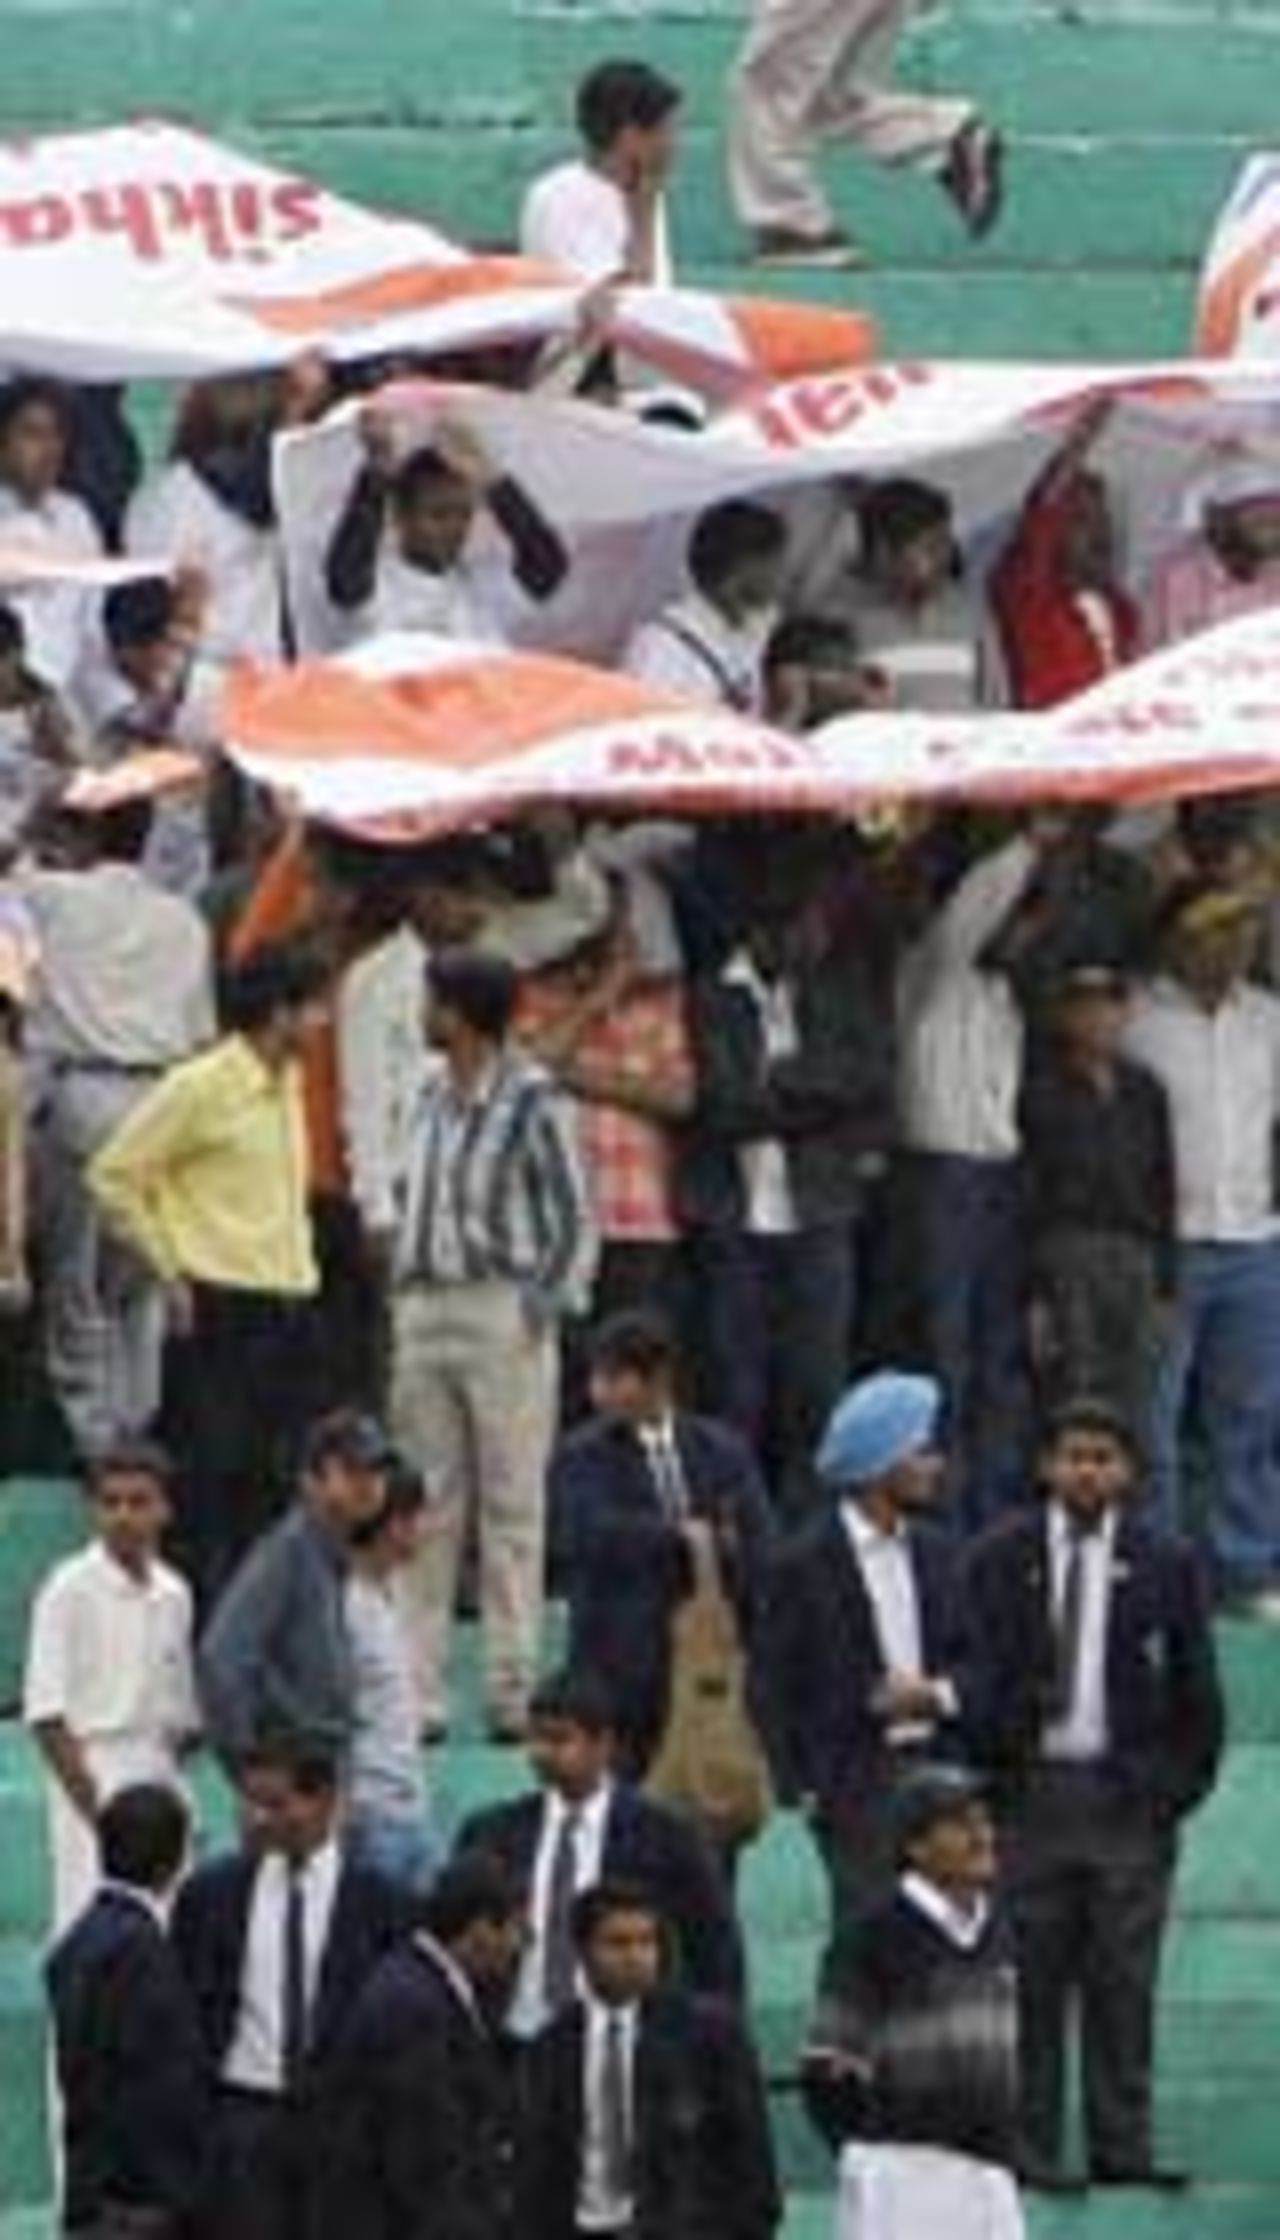 Fans wait patiently for play to get under way, India v Pakistan, 1st Test, Mohali, March 9, 2005